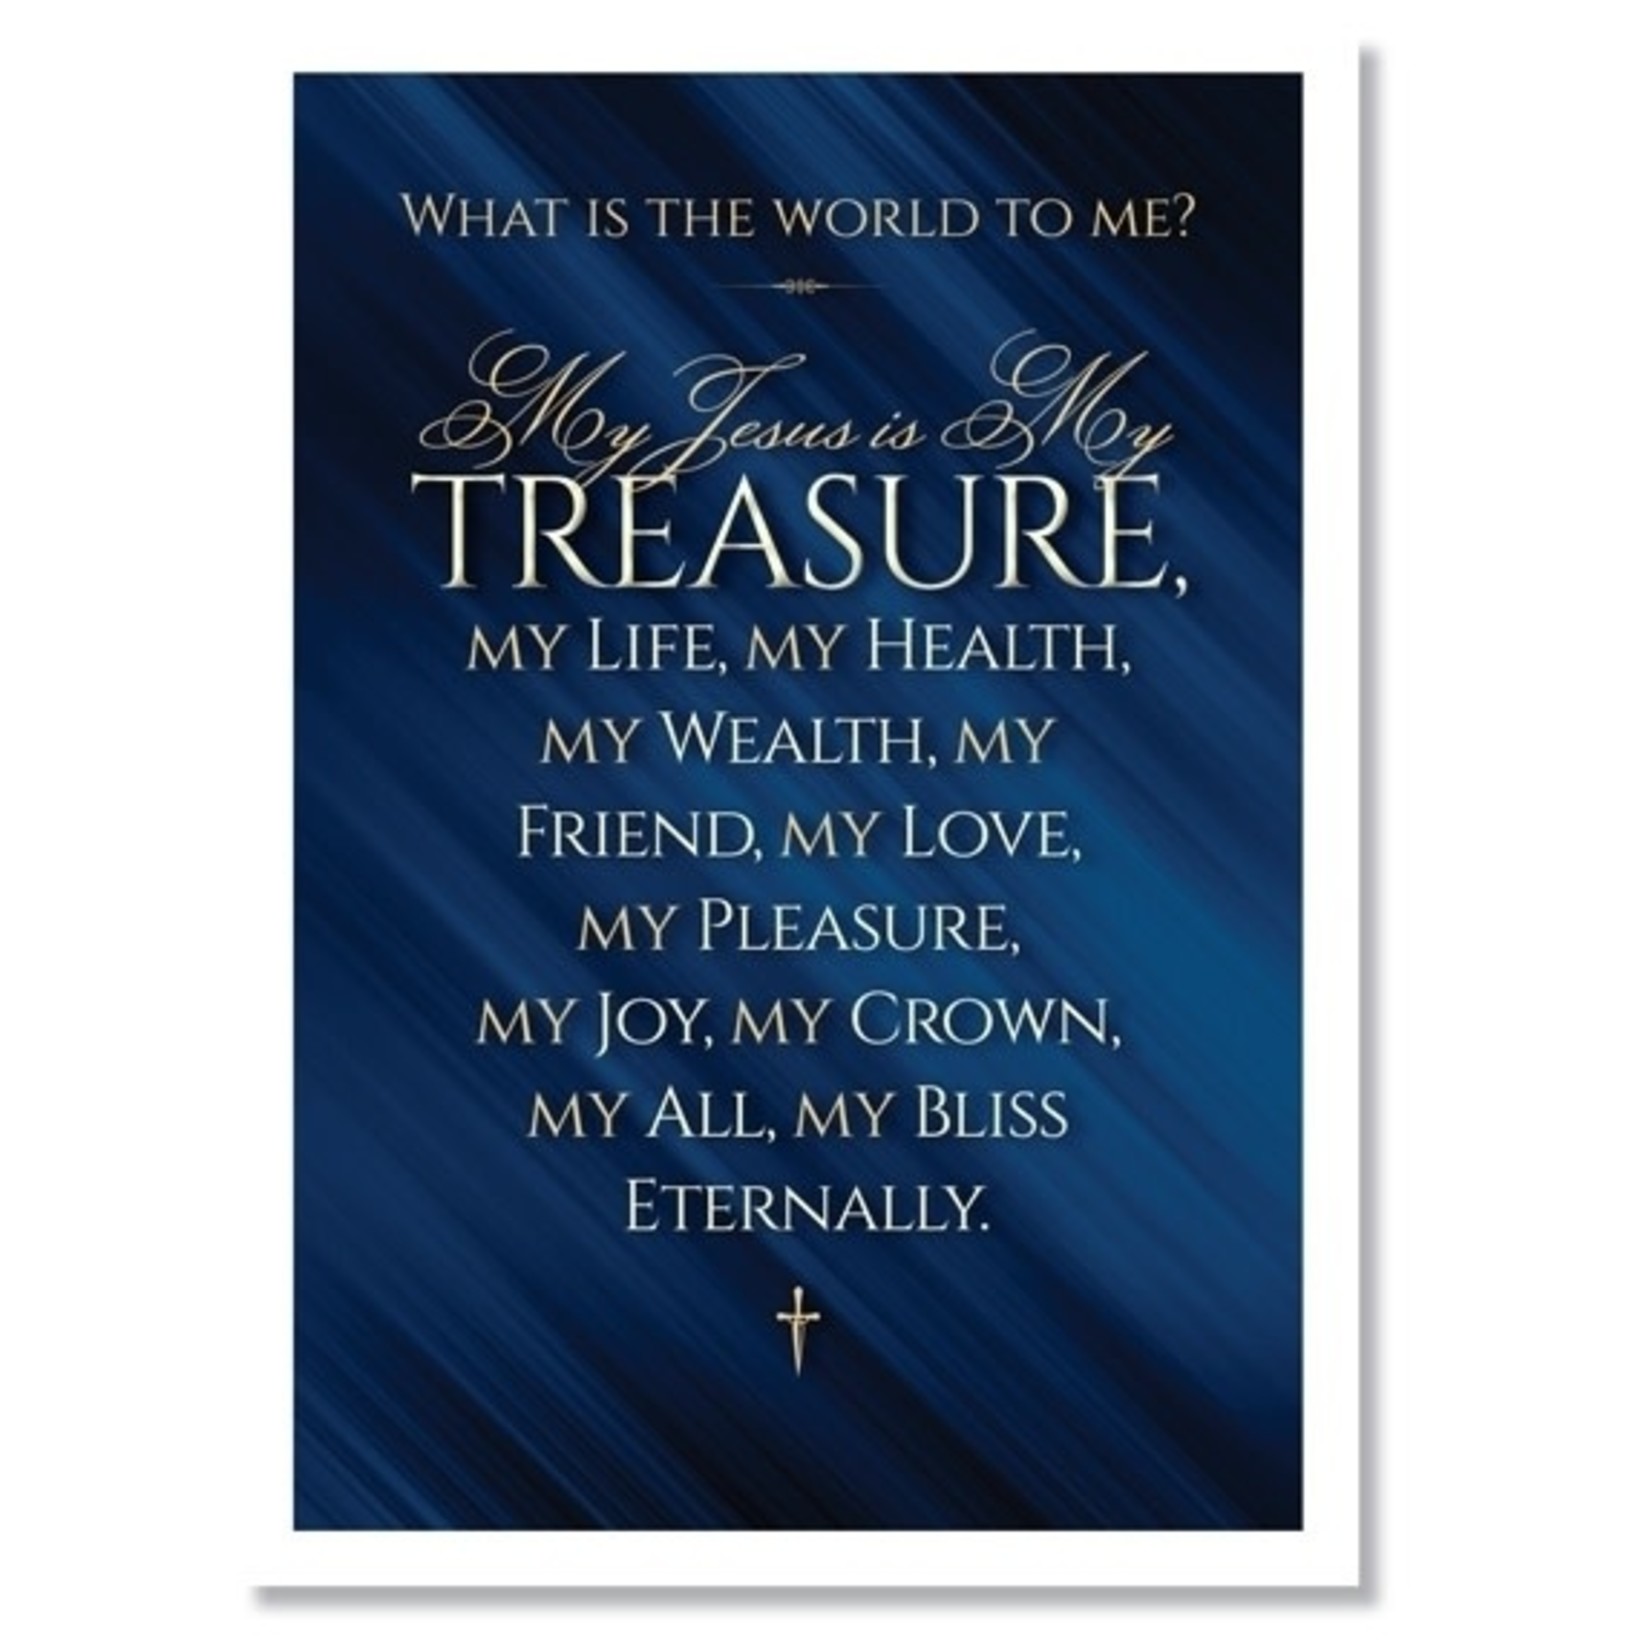 Hymns In My Heart Hymns In My Heart - 5x7" Greeting Card - Encouragement - What Is the World To Me?